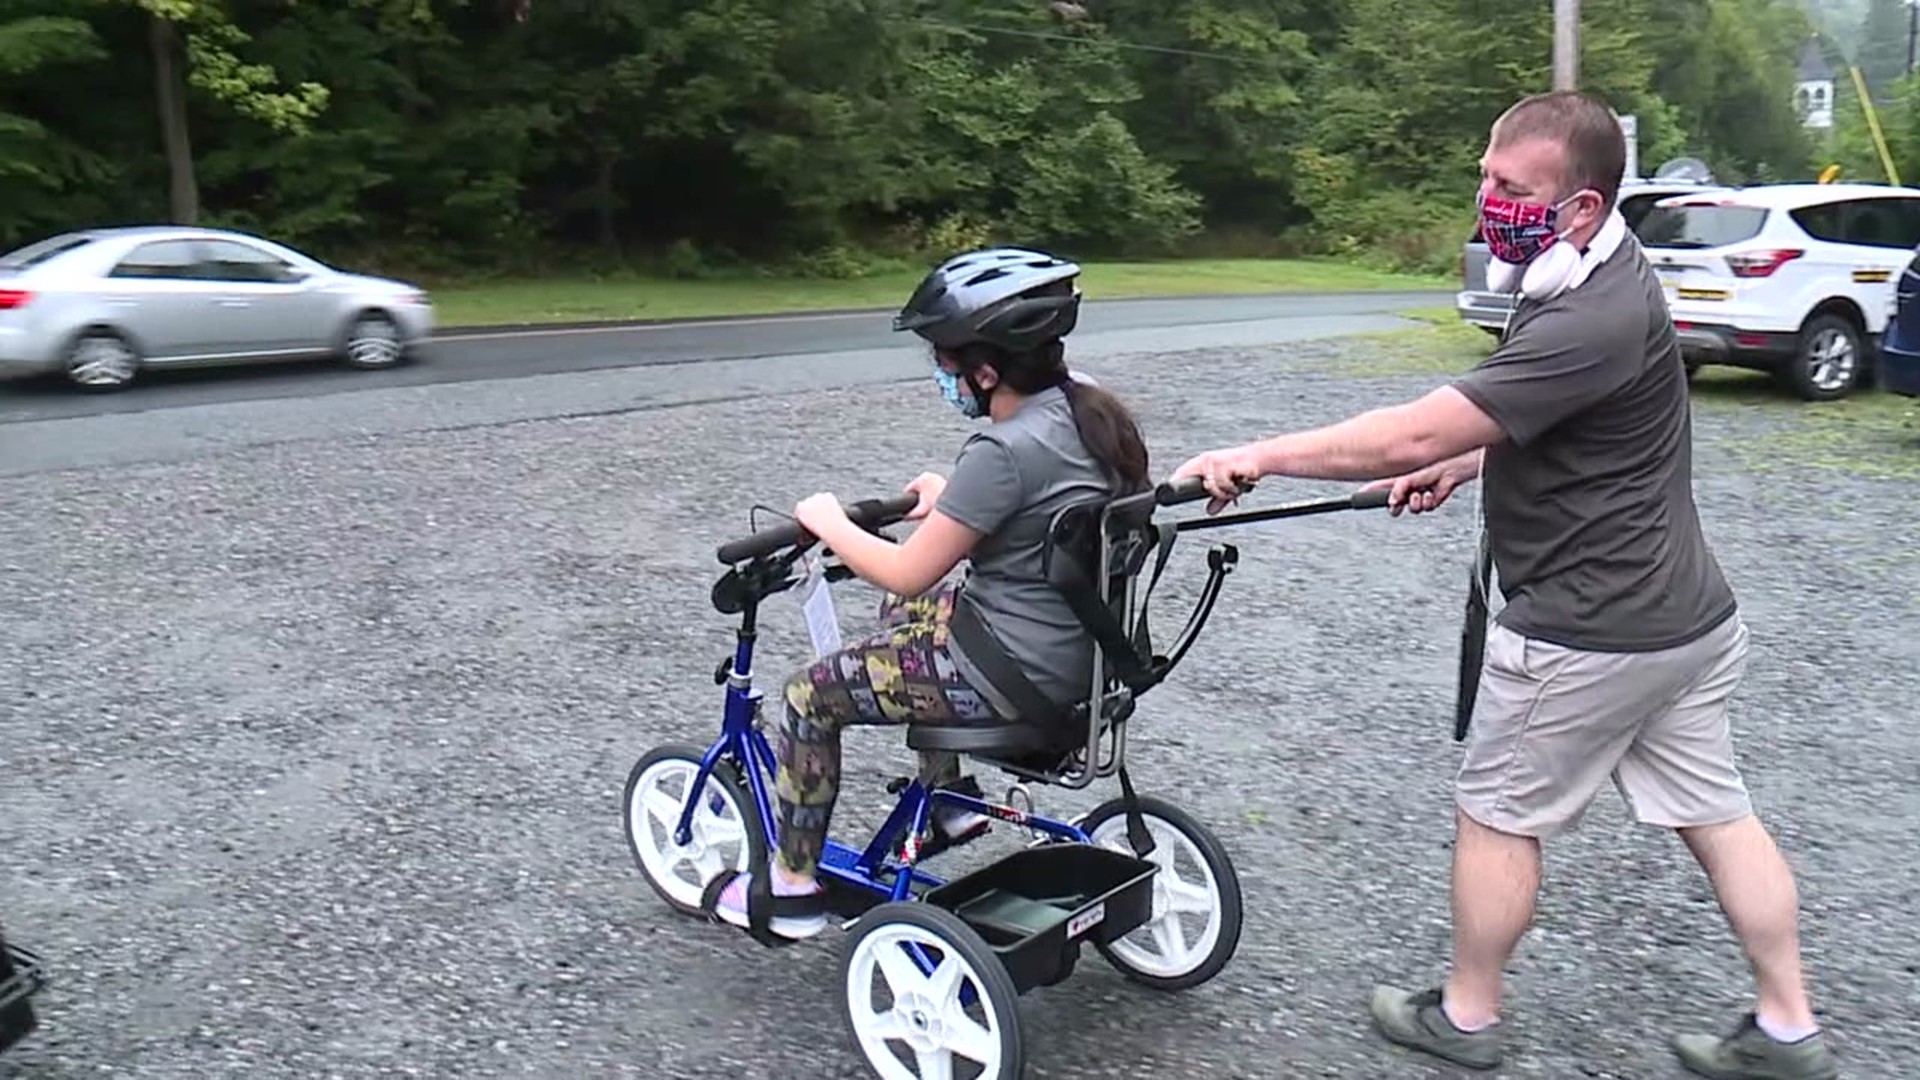 A children's charity out of Pittsburgh traveled to Carbon County to give away adaptive strollers and bikes to families of kids with disabilities.